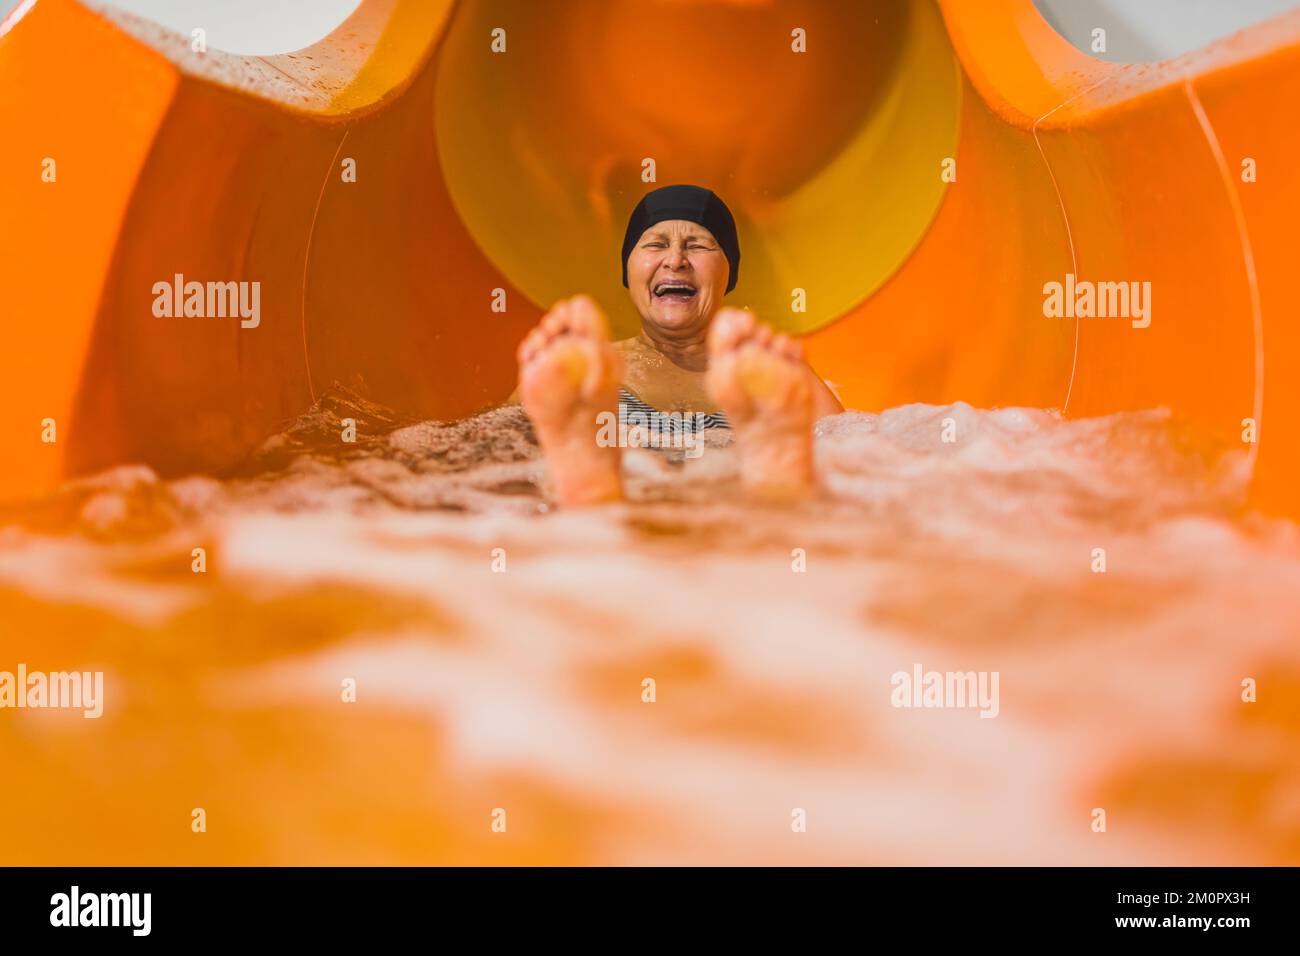 Fun swimming pool or aqua park activities. Laughing amused elderly caucasian female pensioner in black hair cap sliding on an orange water slide. Blurred feet in the foreground. High quality photo Stock Photo